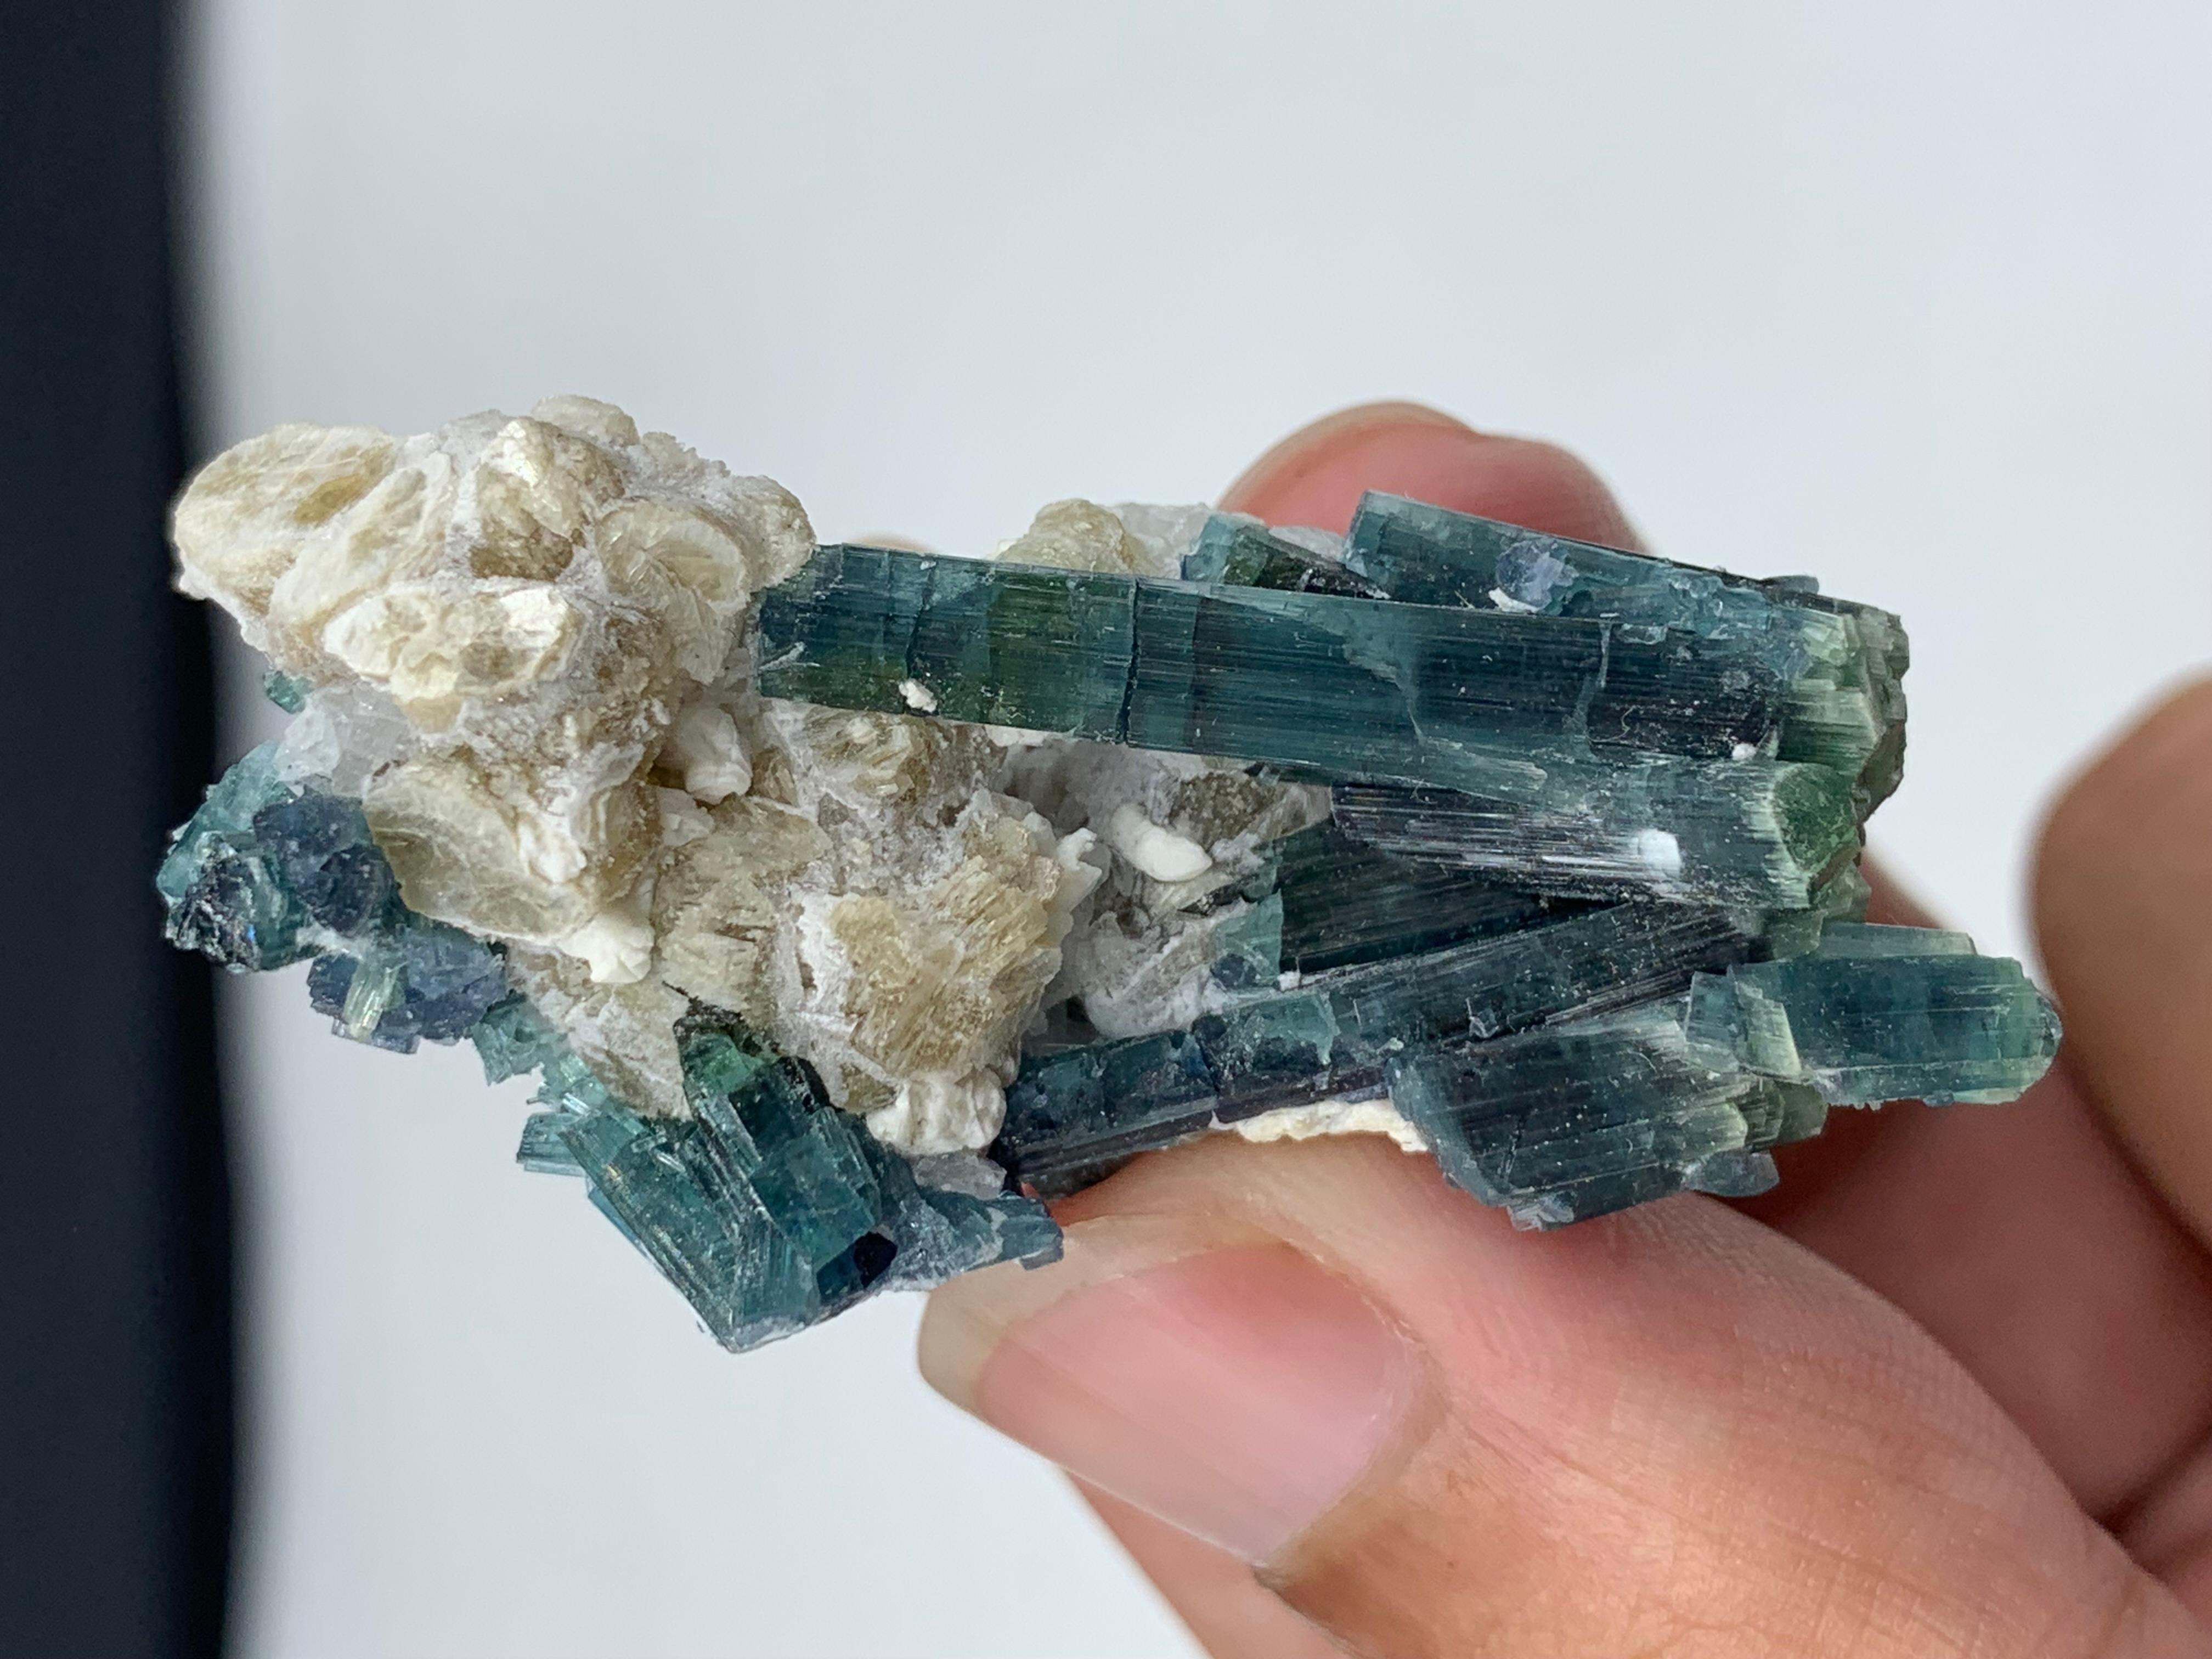 20.81 Gram Indicolite Blue Tourmaline Crystal With Albite From Afghanistan 
Weight: 20.81 gram
Dimension : 5 x 2.4 x 1.9 Cm 
Origin: Kunar, Afghanistan 

Tourmaline is a crystalline silicate mineral group in which boron is compounded with elements